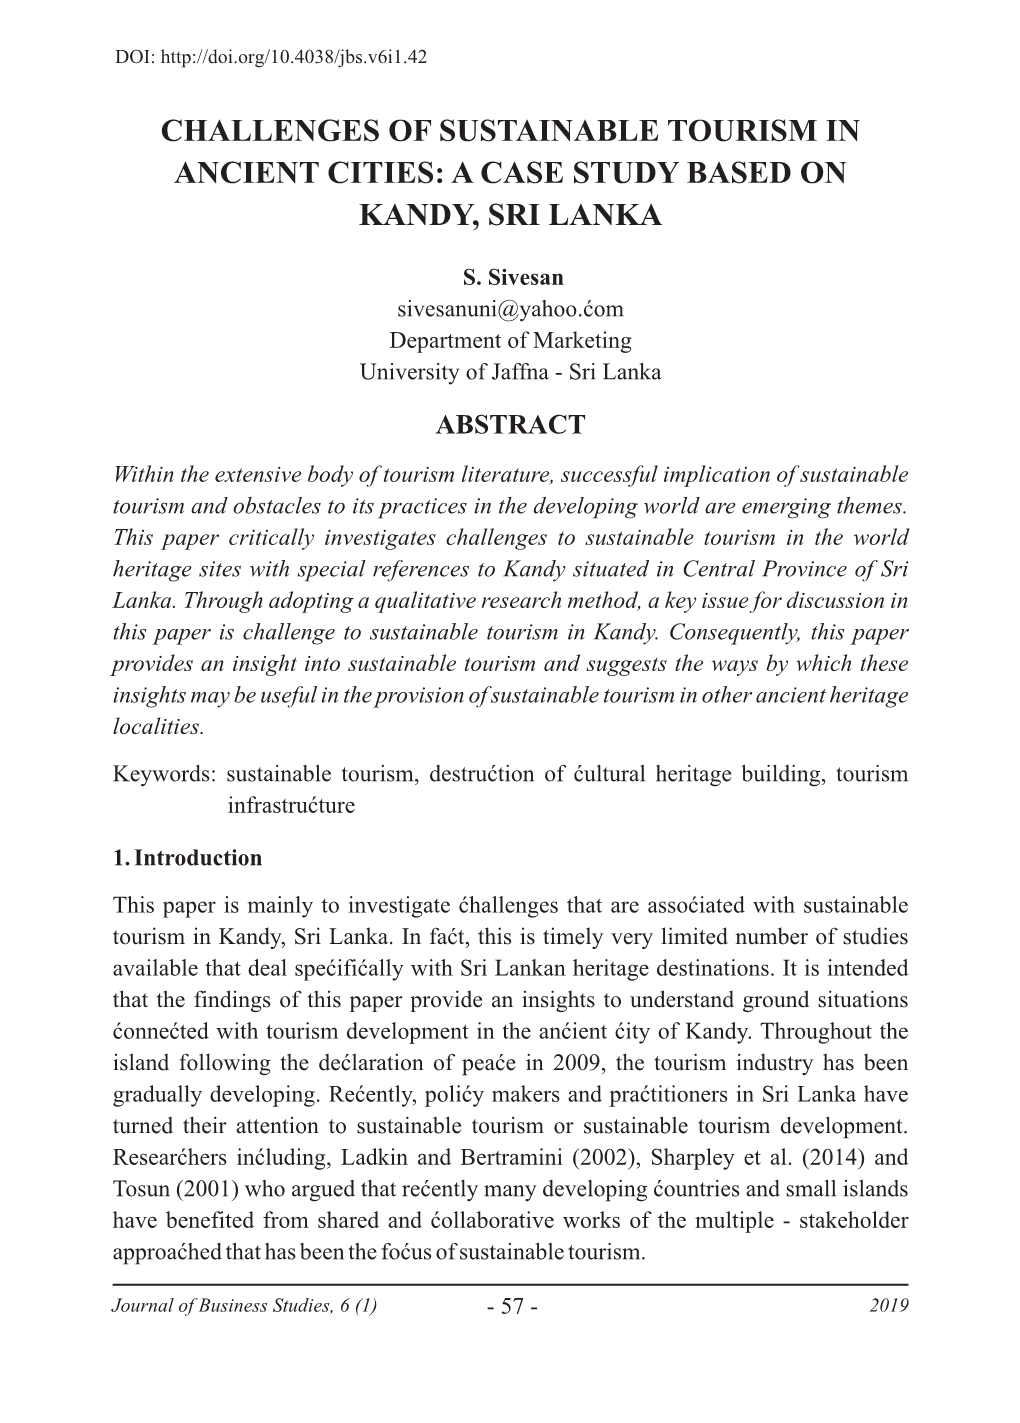 Challenges of Sustainable Tourism in Ancient Cities: a Case Study Based on Kandy, Sri Lanka